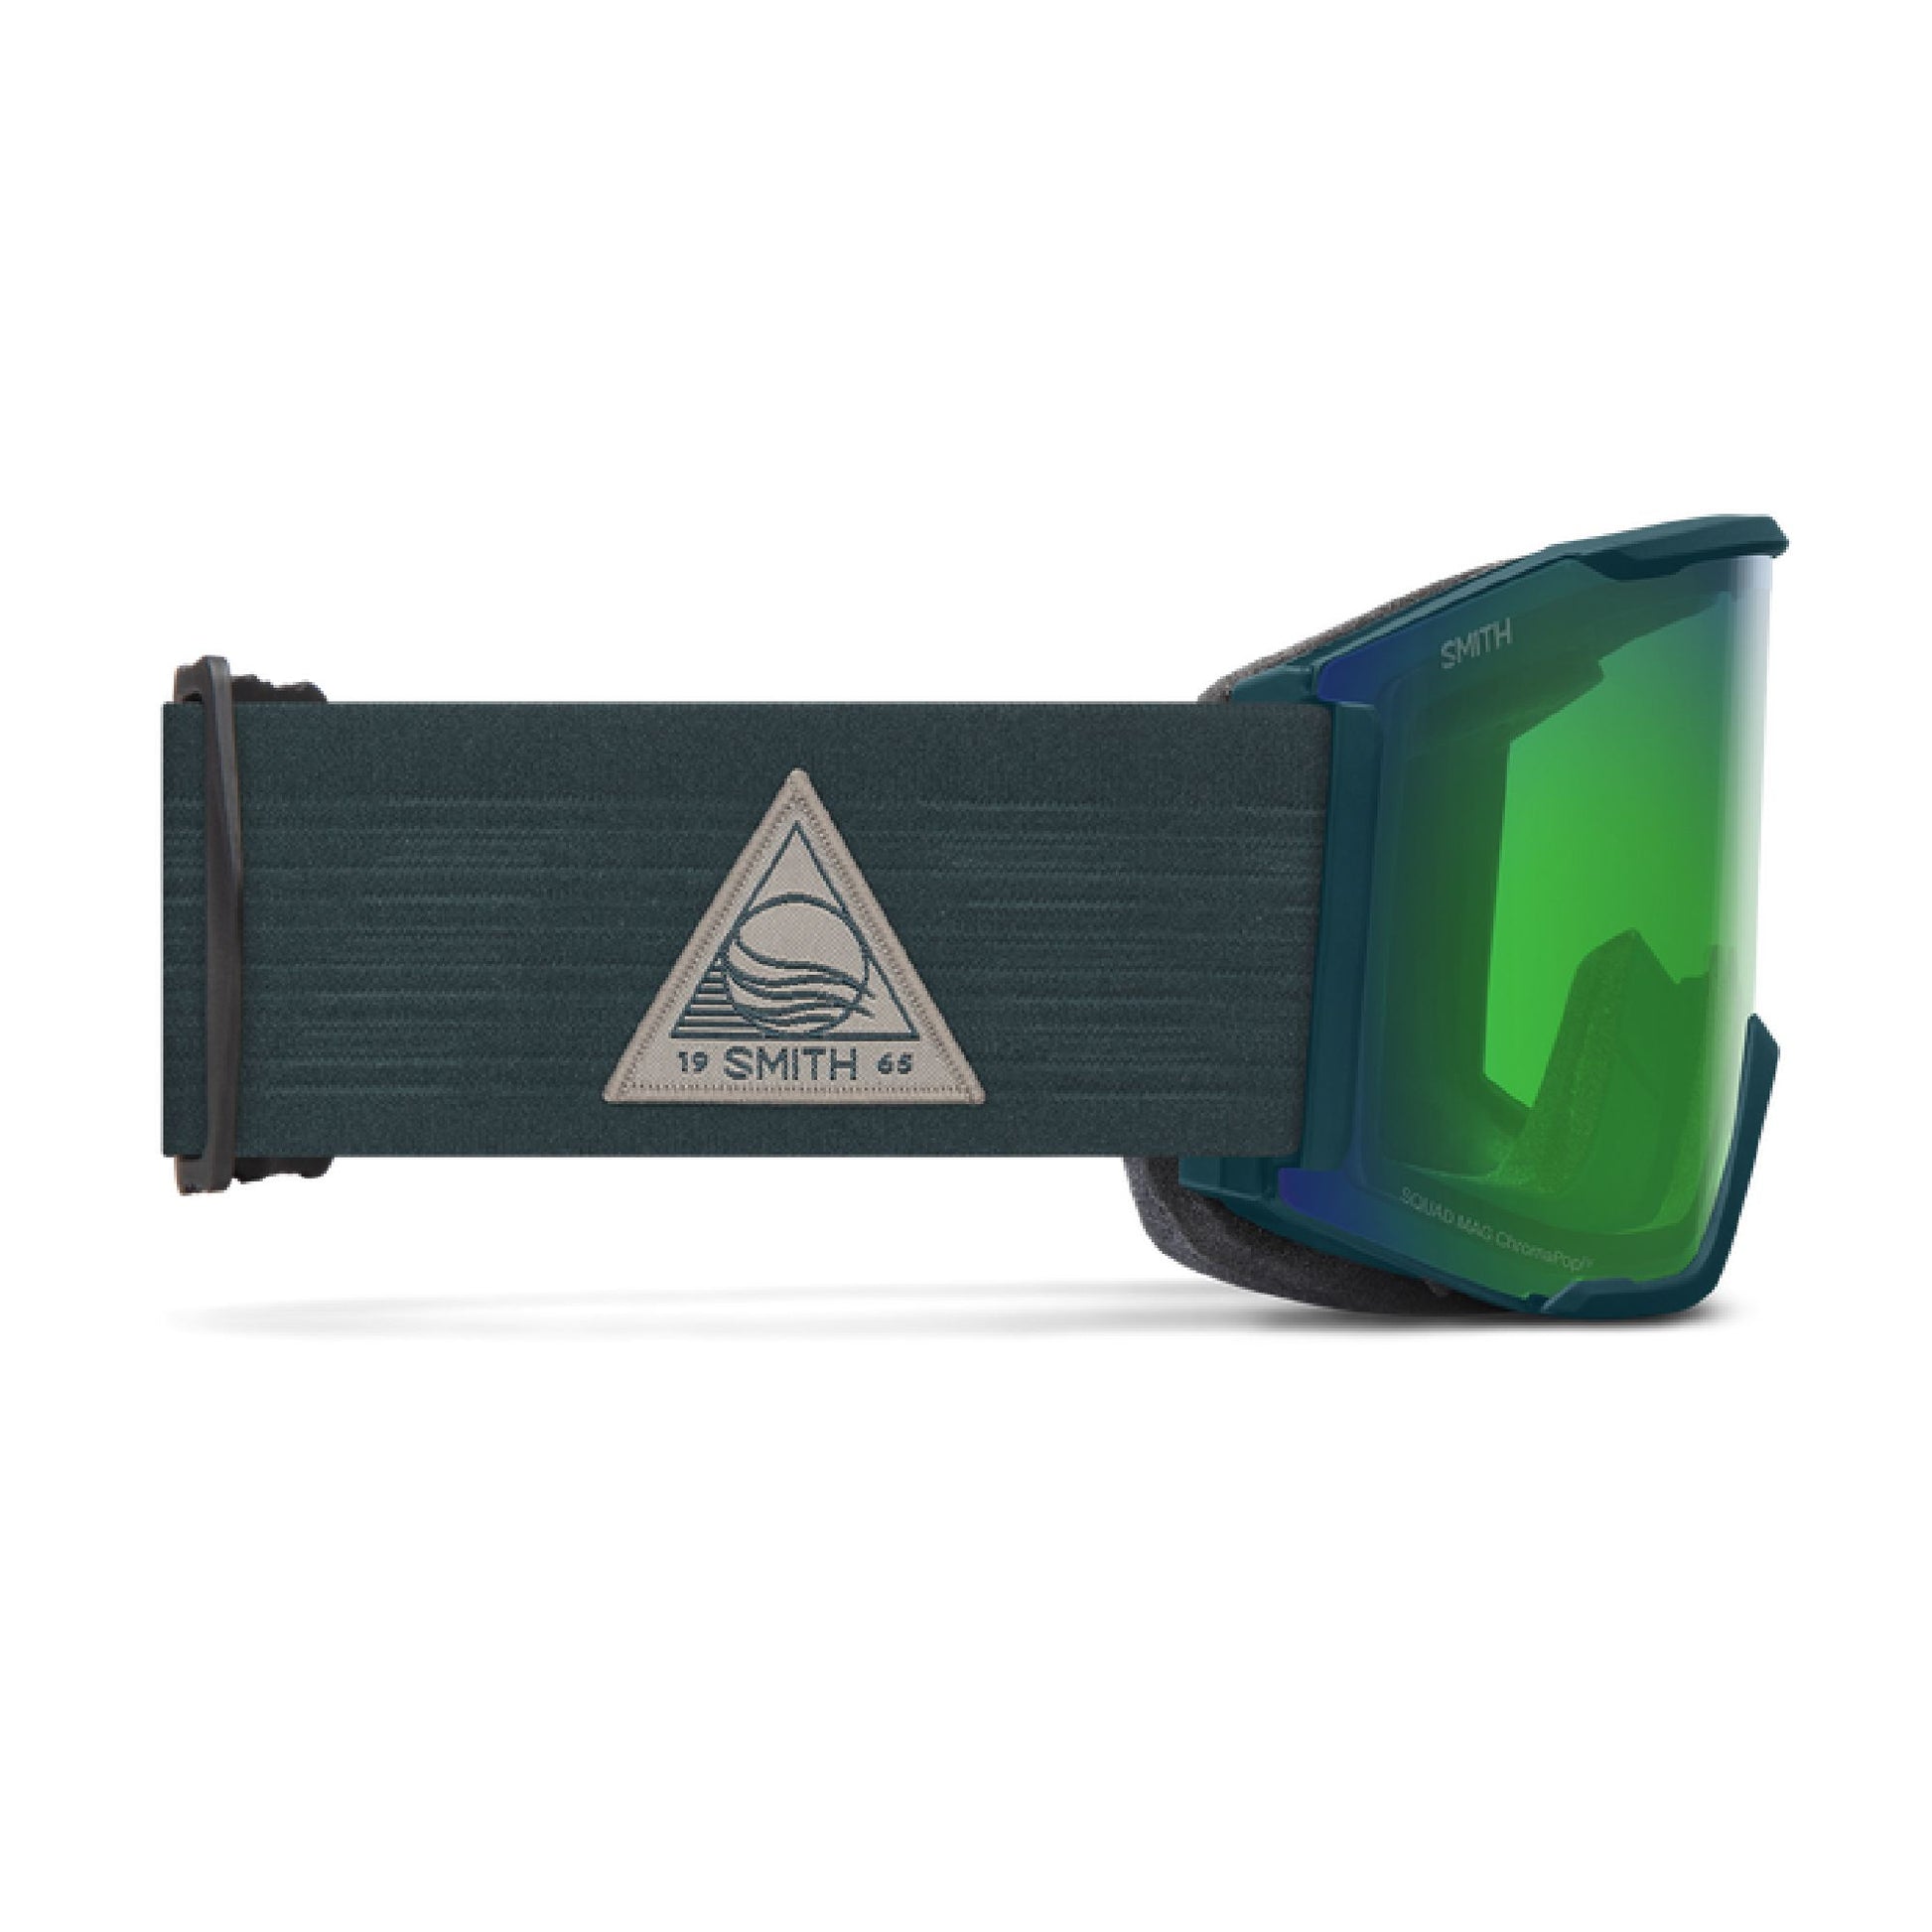 Smith Squad MAG Snow Goggle Pacific Flow ChromaPop Everyday Green Mirror Snow Goggles